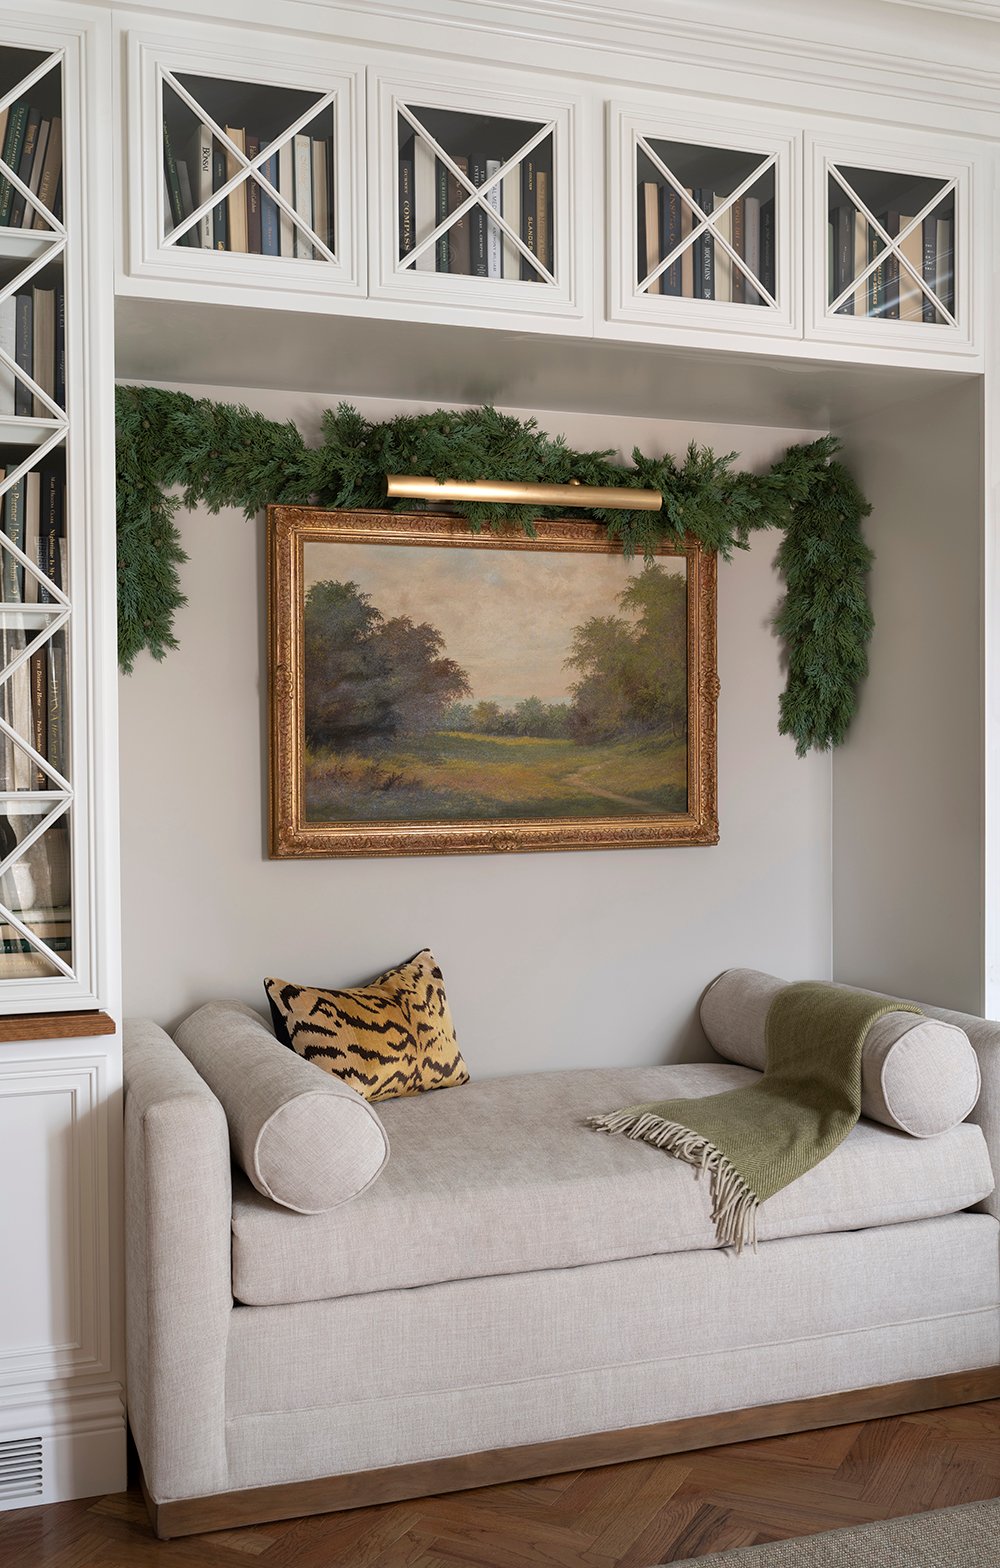 10 Ideas for Styling Garland - roomfortuesday.com